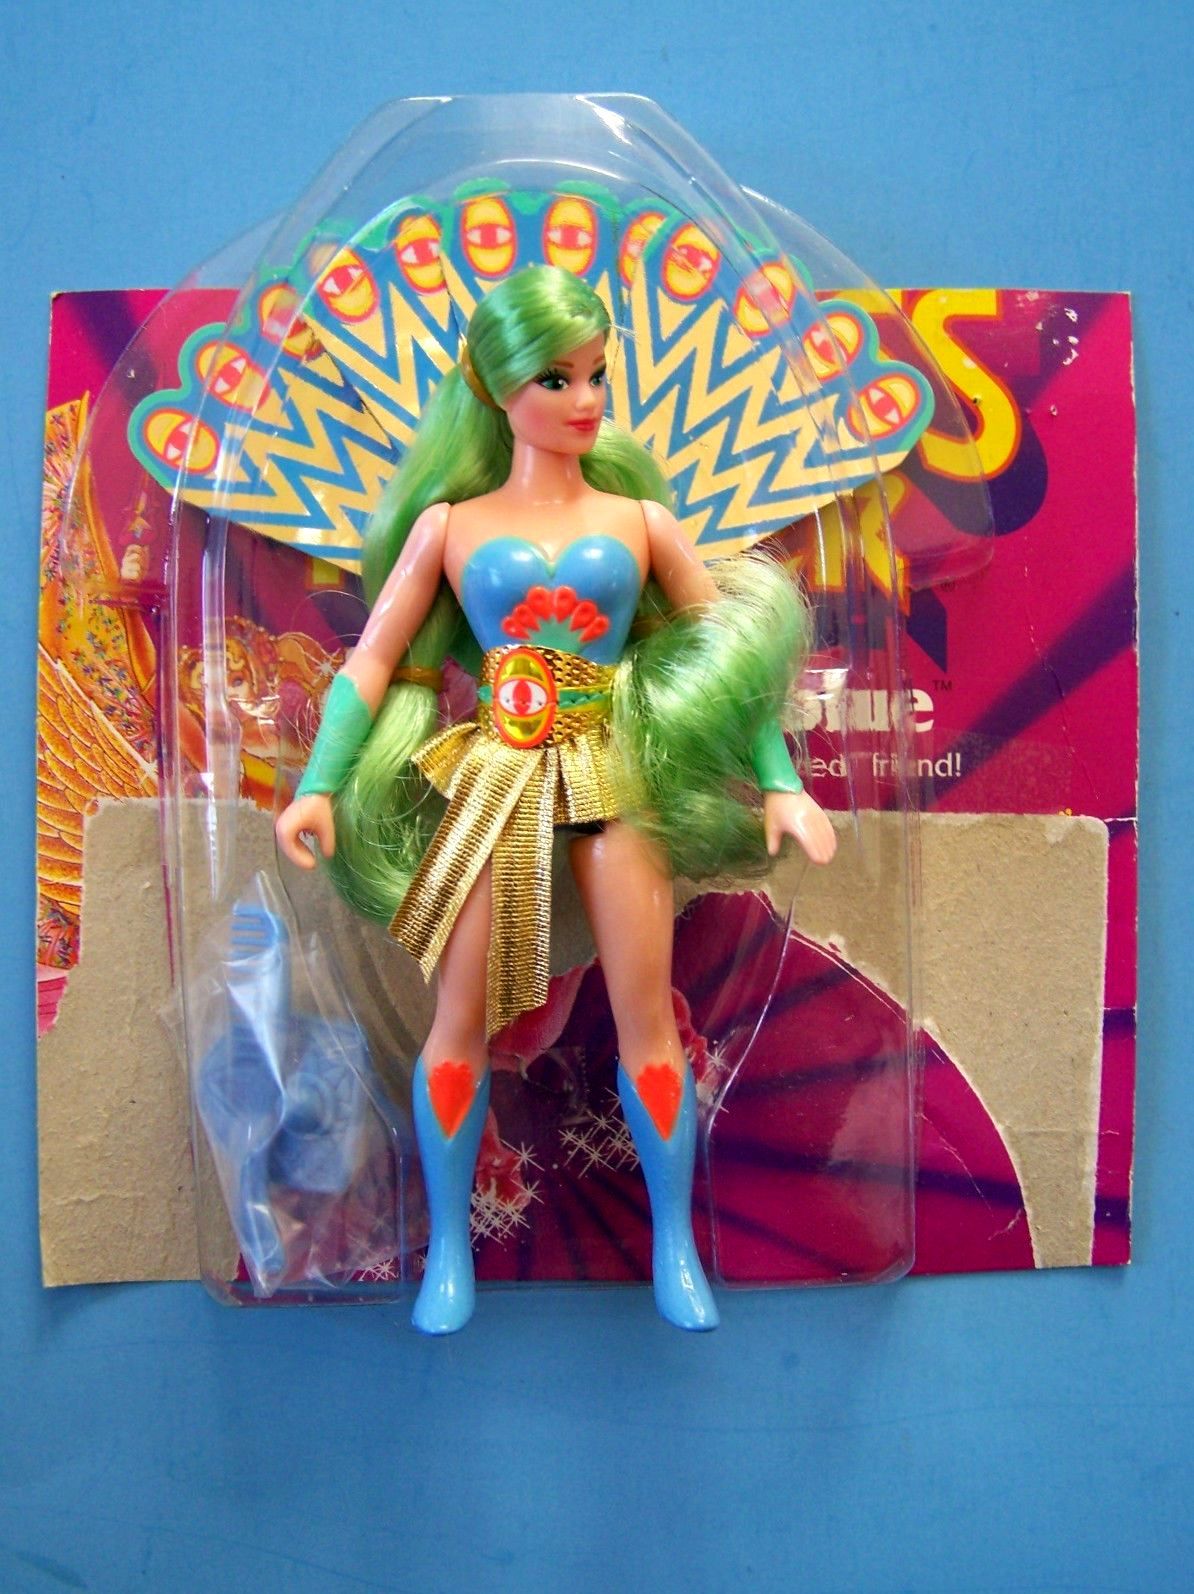 She-Ra: Princess of Power (1985) - (figures, dolls, toys and objects) 44